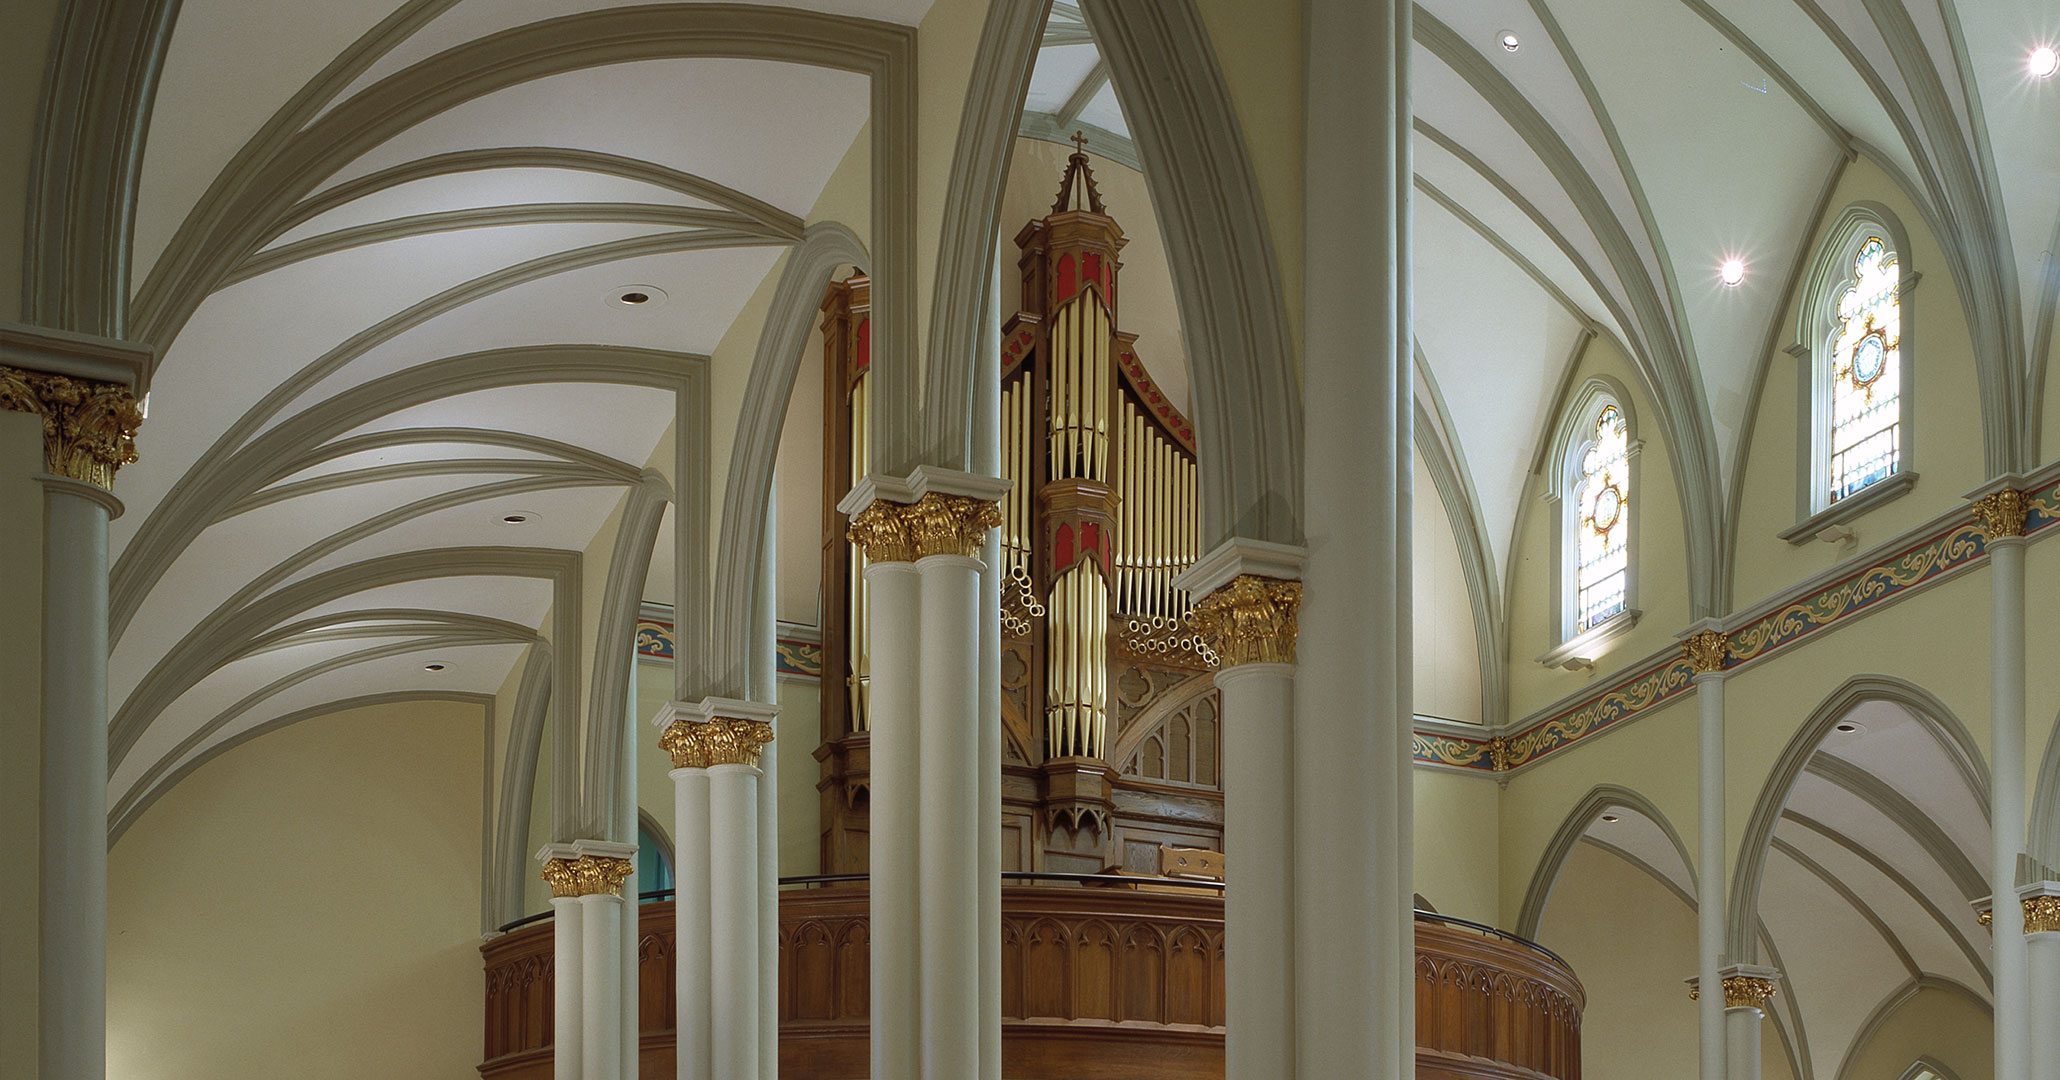 St Peter’s Catholic Church in Columbia, SC worked with Boudreaux architects to restore the Basilica.